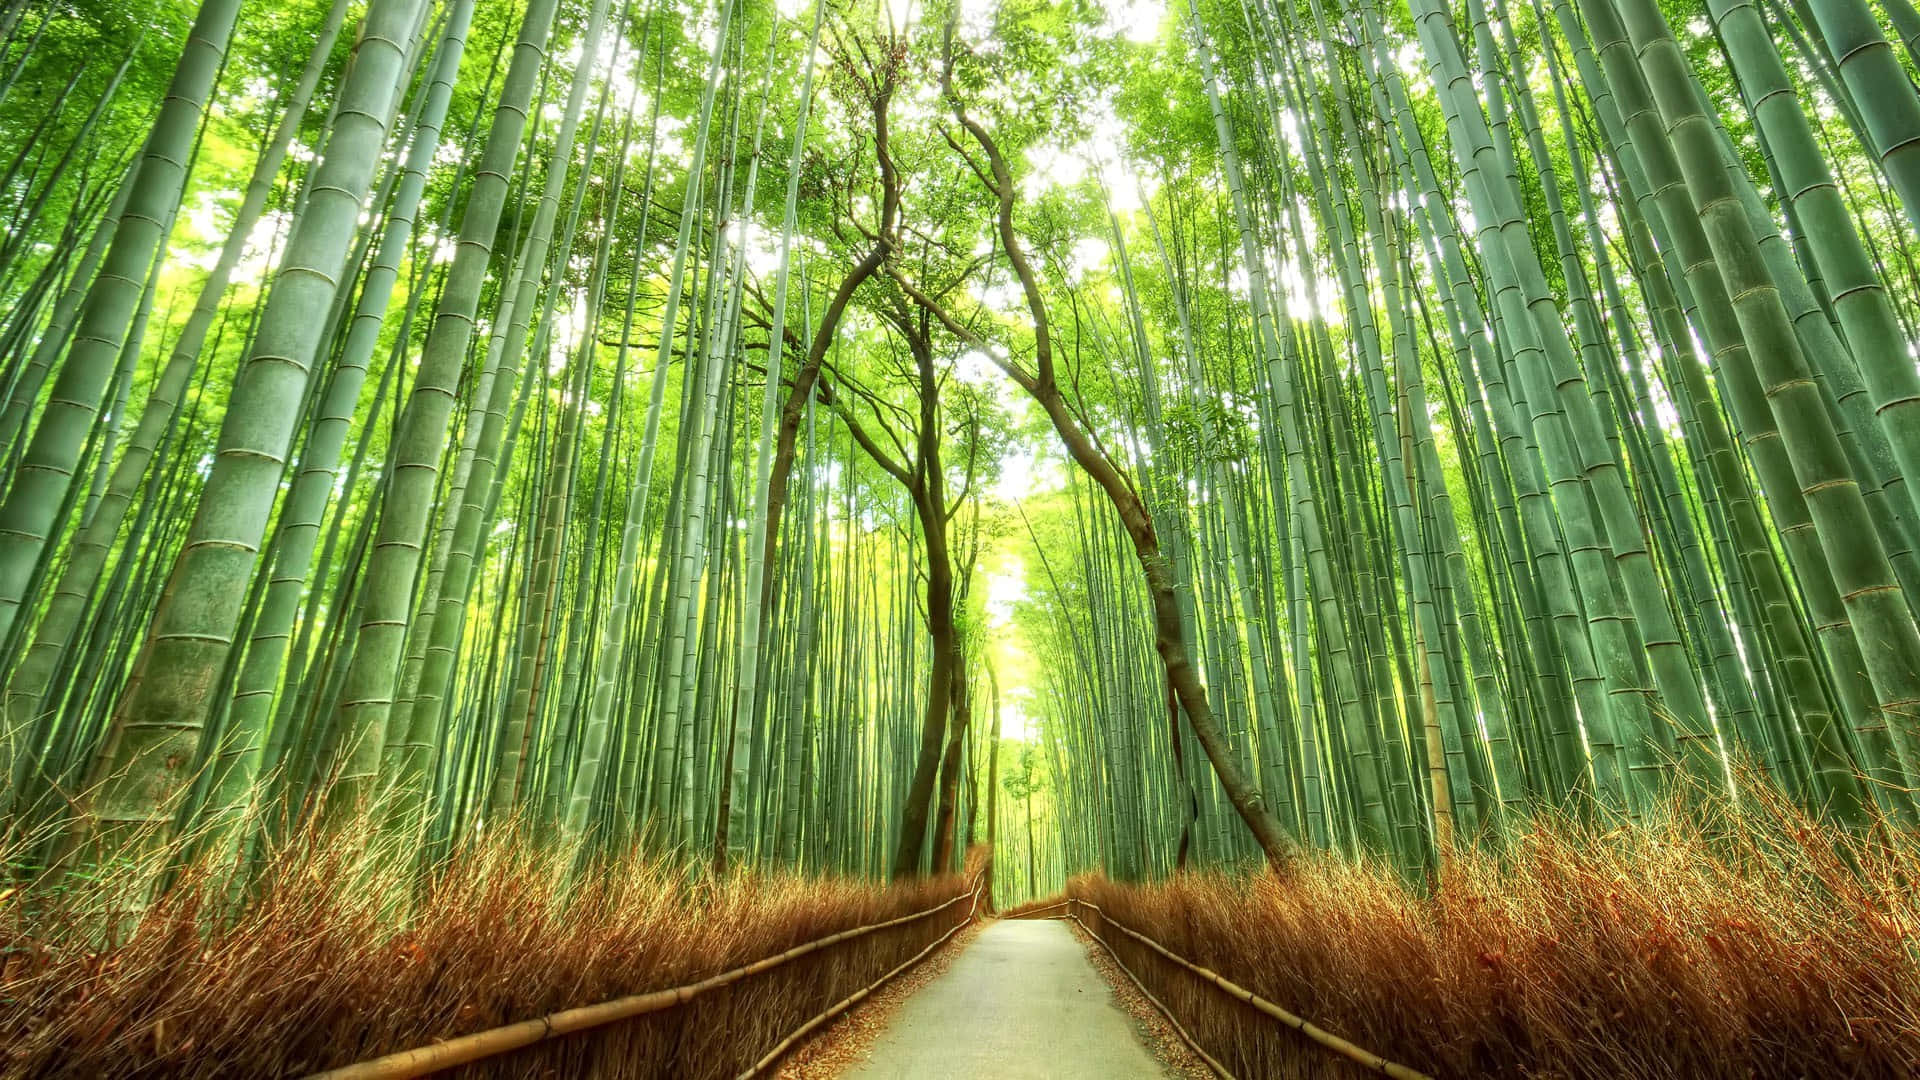 A Pathway Through A Bamboo Forest